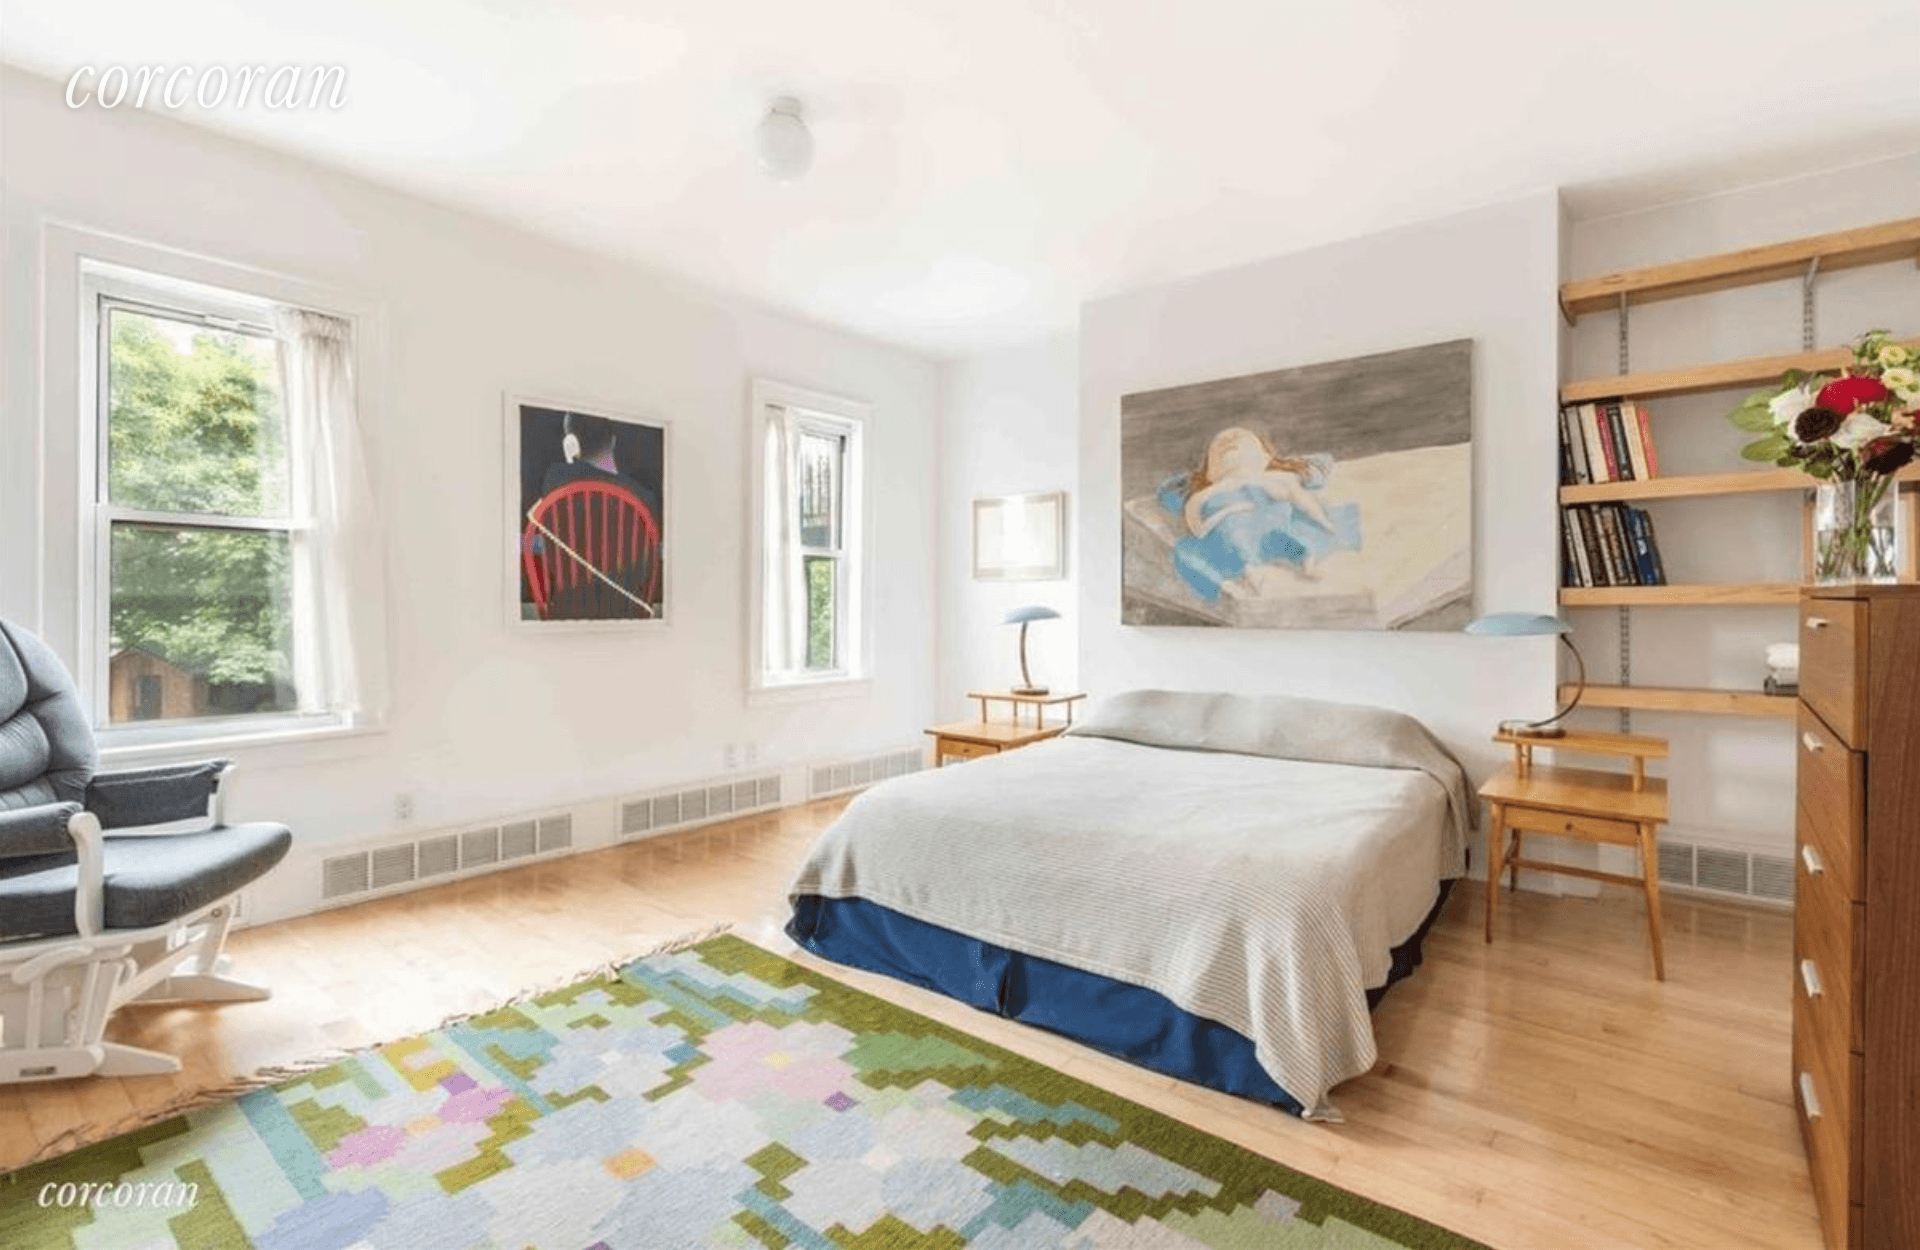 Welcome home to this fully renovated, floor through one bedroom set on the top floor of a charming Gowanus townhouse.